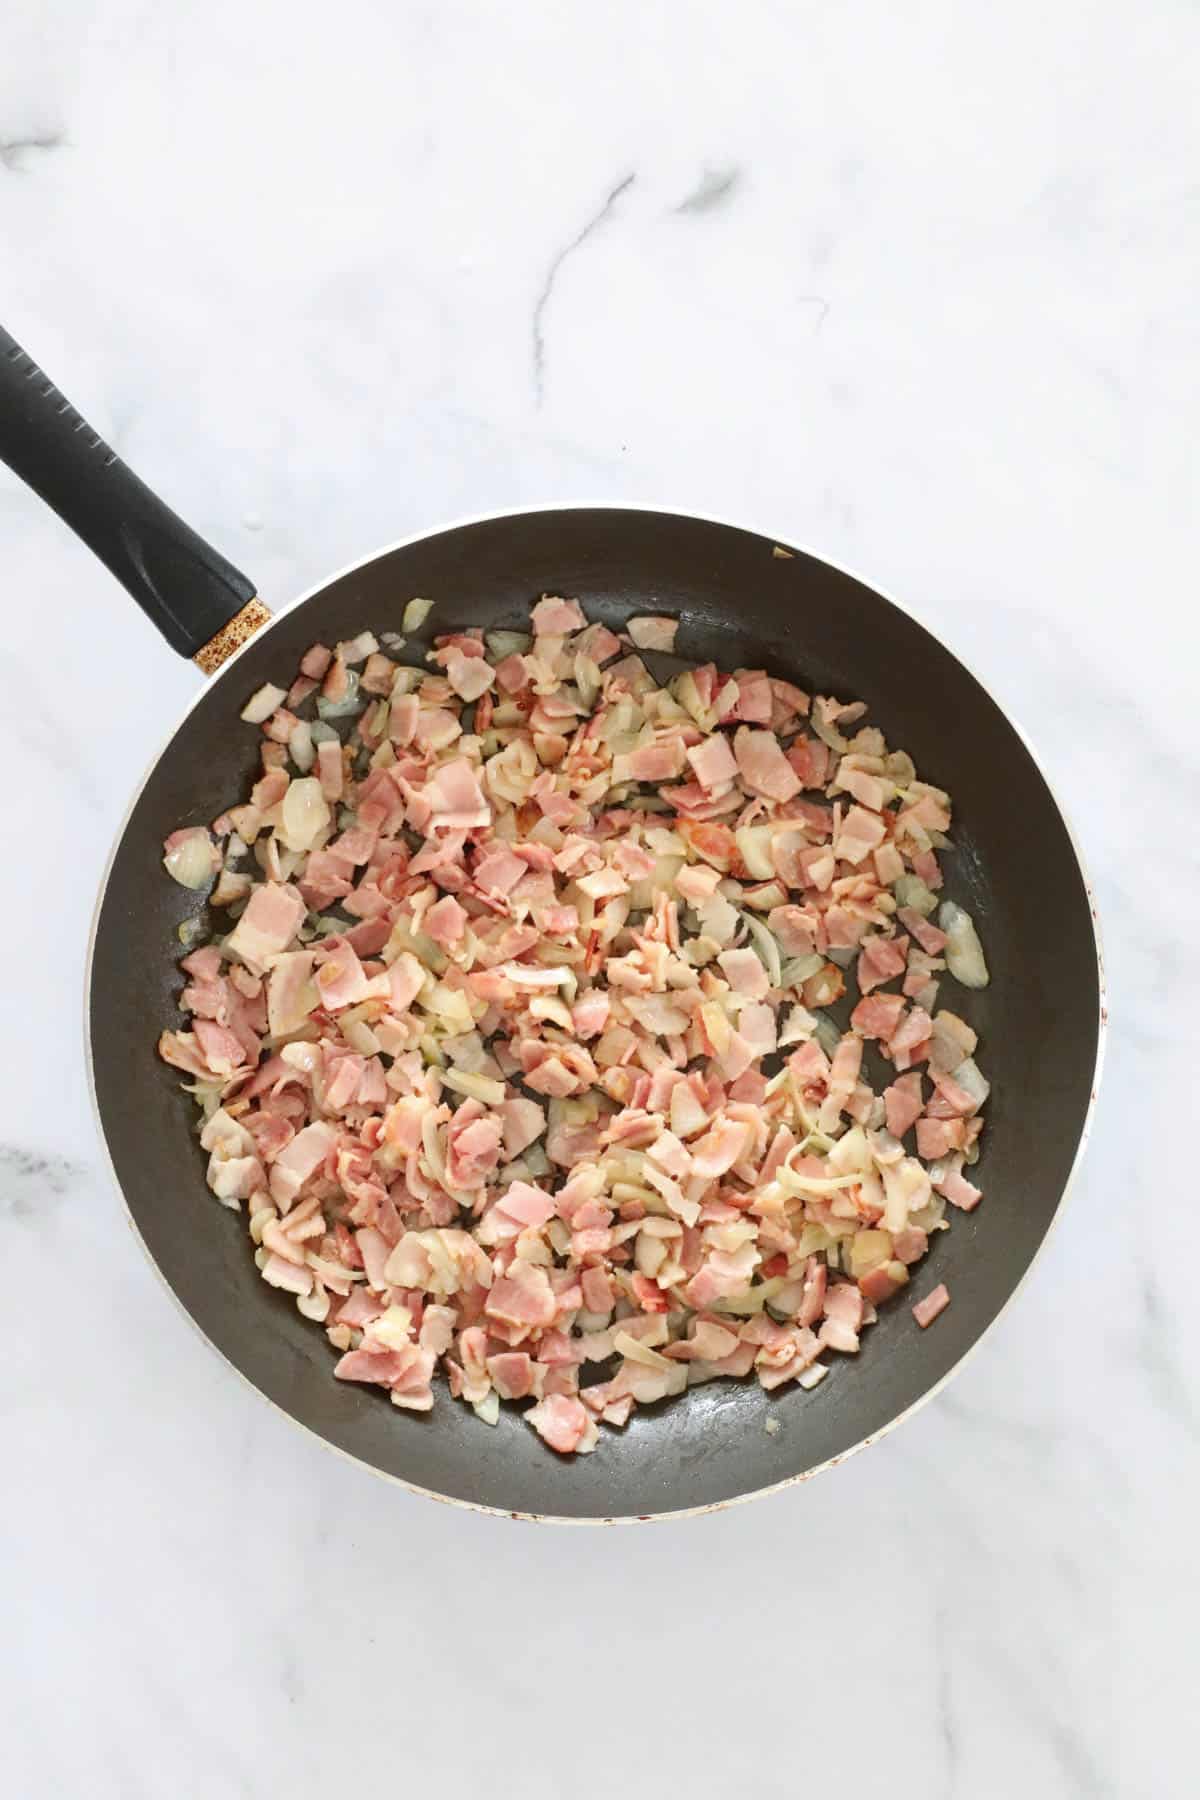 Chopped bacon and onion sauring in a frying pan.